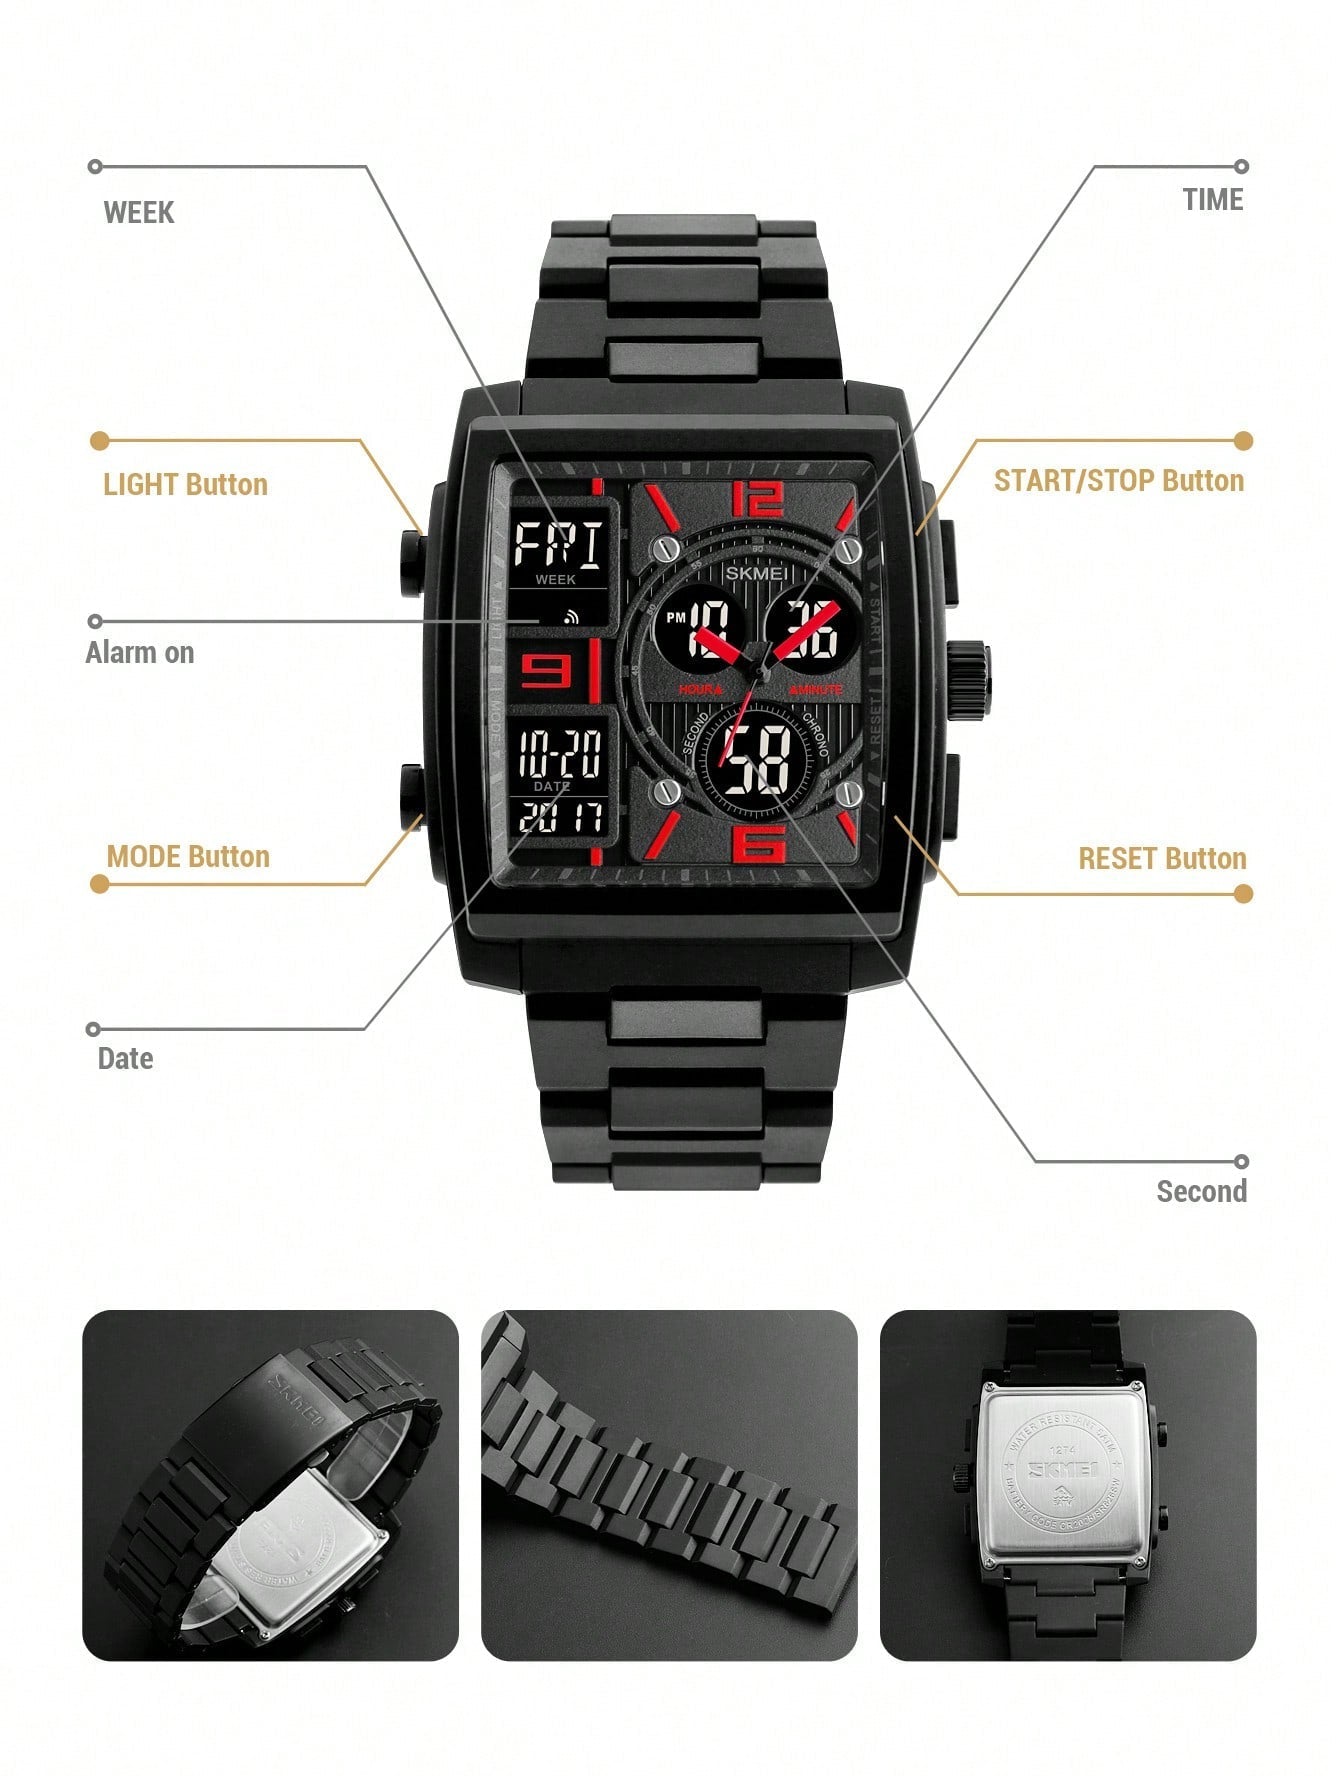 SKMEI 1pc Black TPU Strap Vintage Stopwatch Water Resistant Calendar 24 Hour Square Dial Digital Watch, For Daily Life